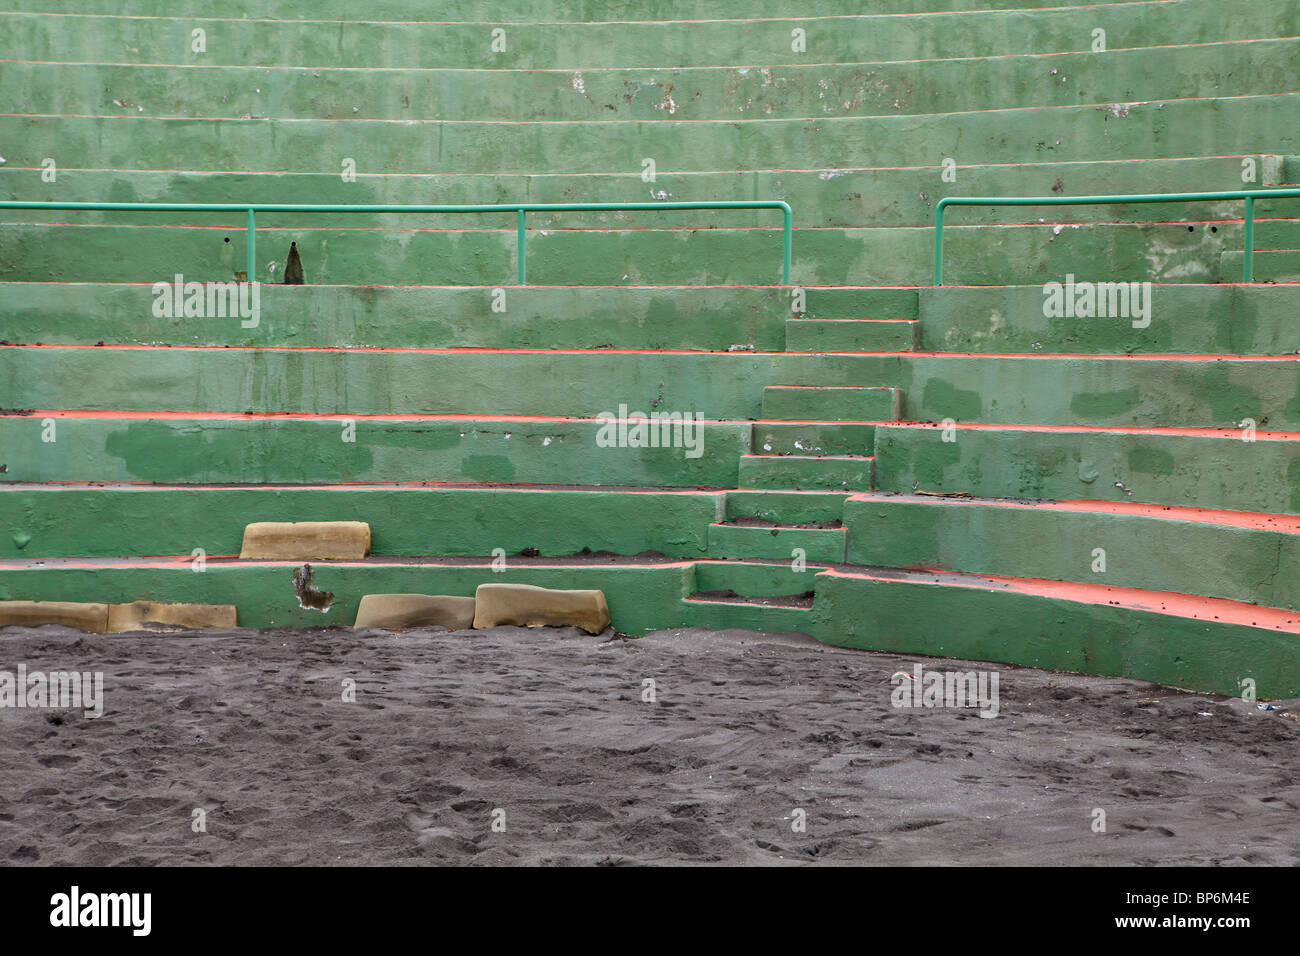 Detail of seats at a sports arena Stock Photo